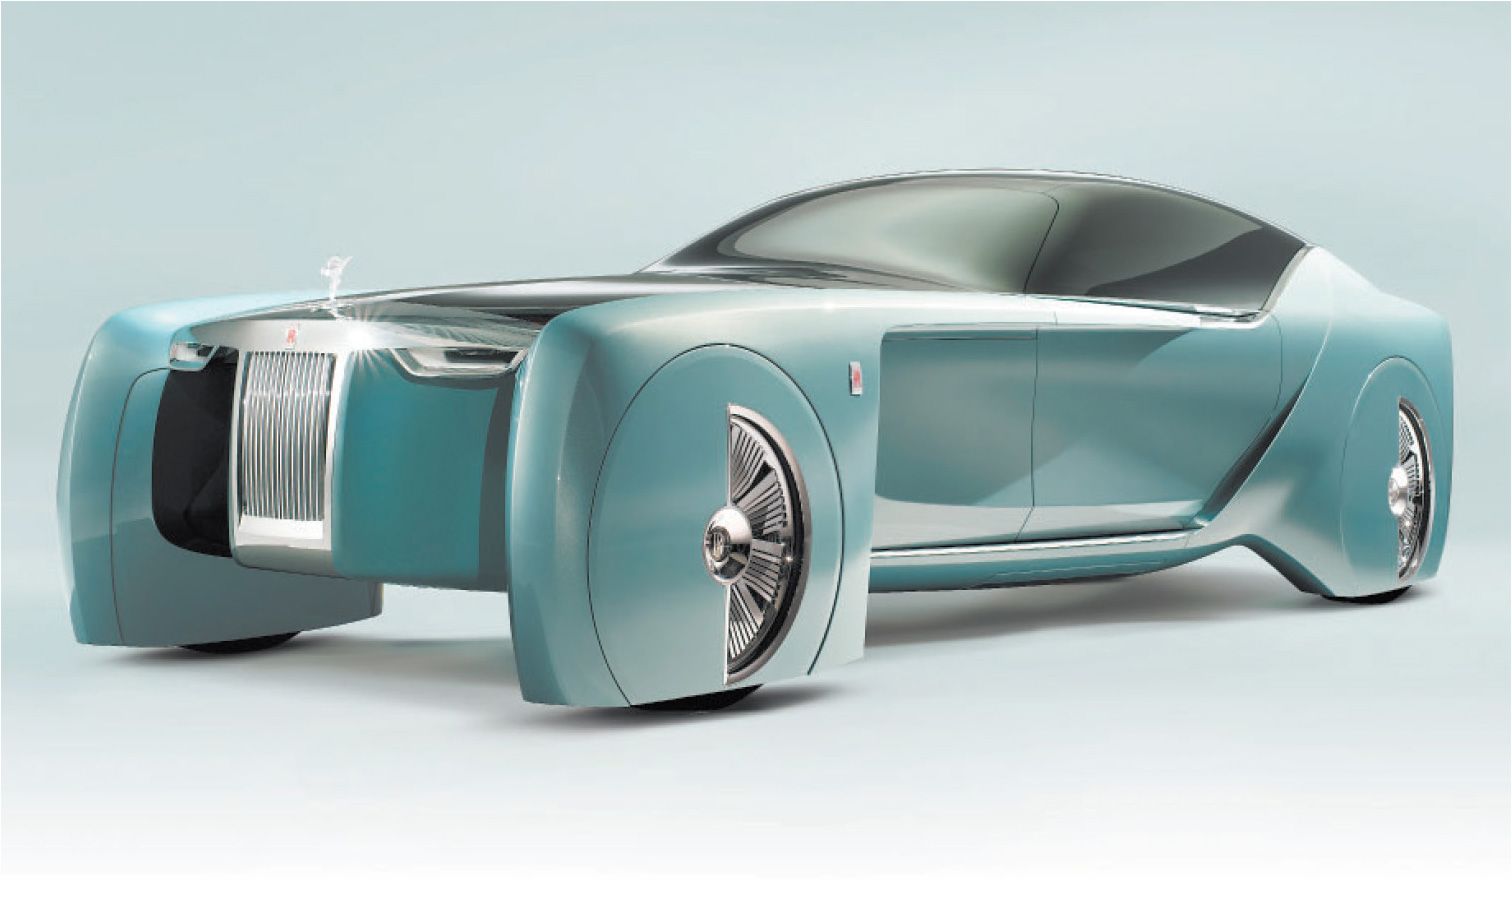 Rolls-Royce Vision Next Concept Courtesy of Rolls-Royce Motor Cars